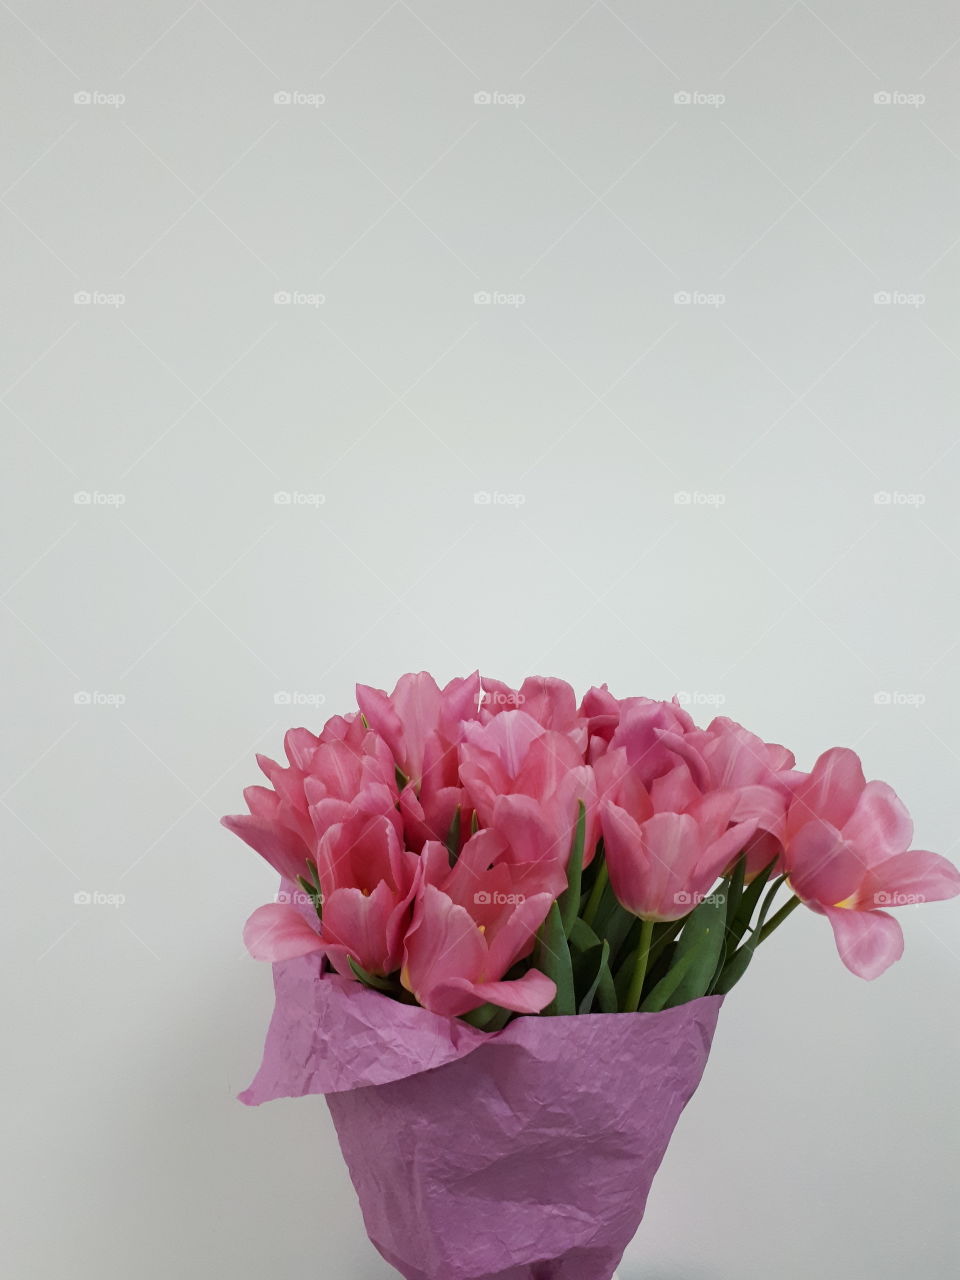 Big bouquet of pink tulips